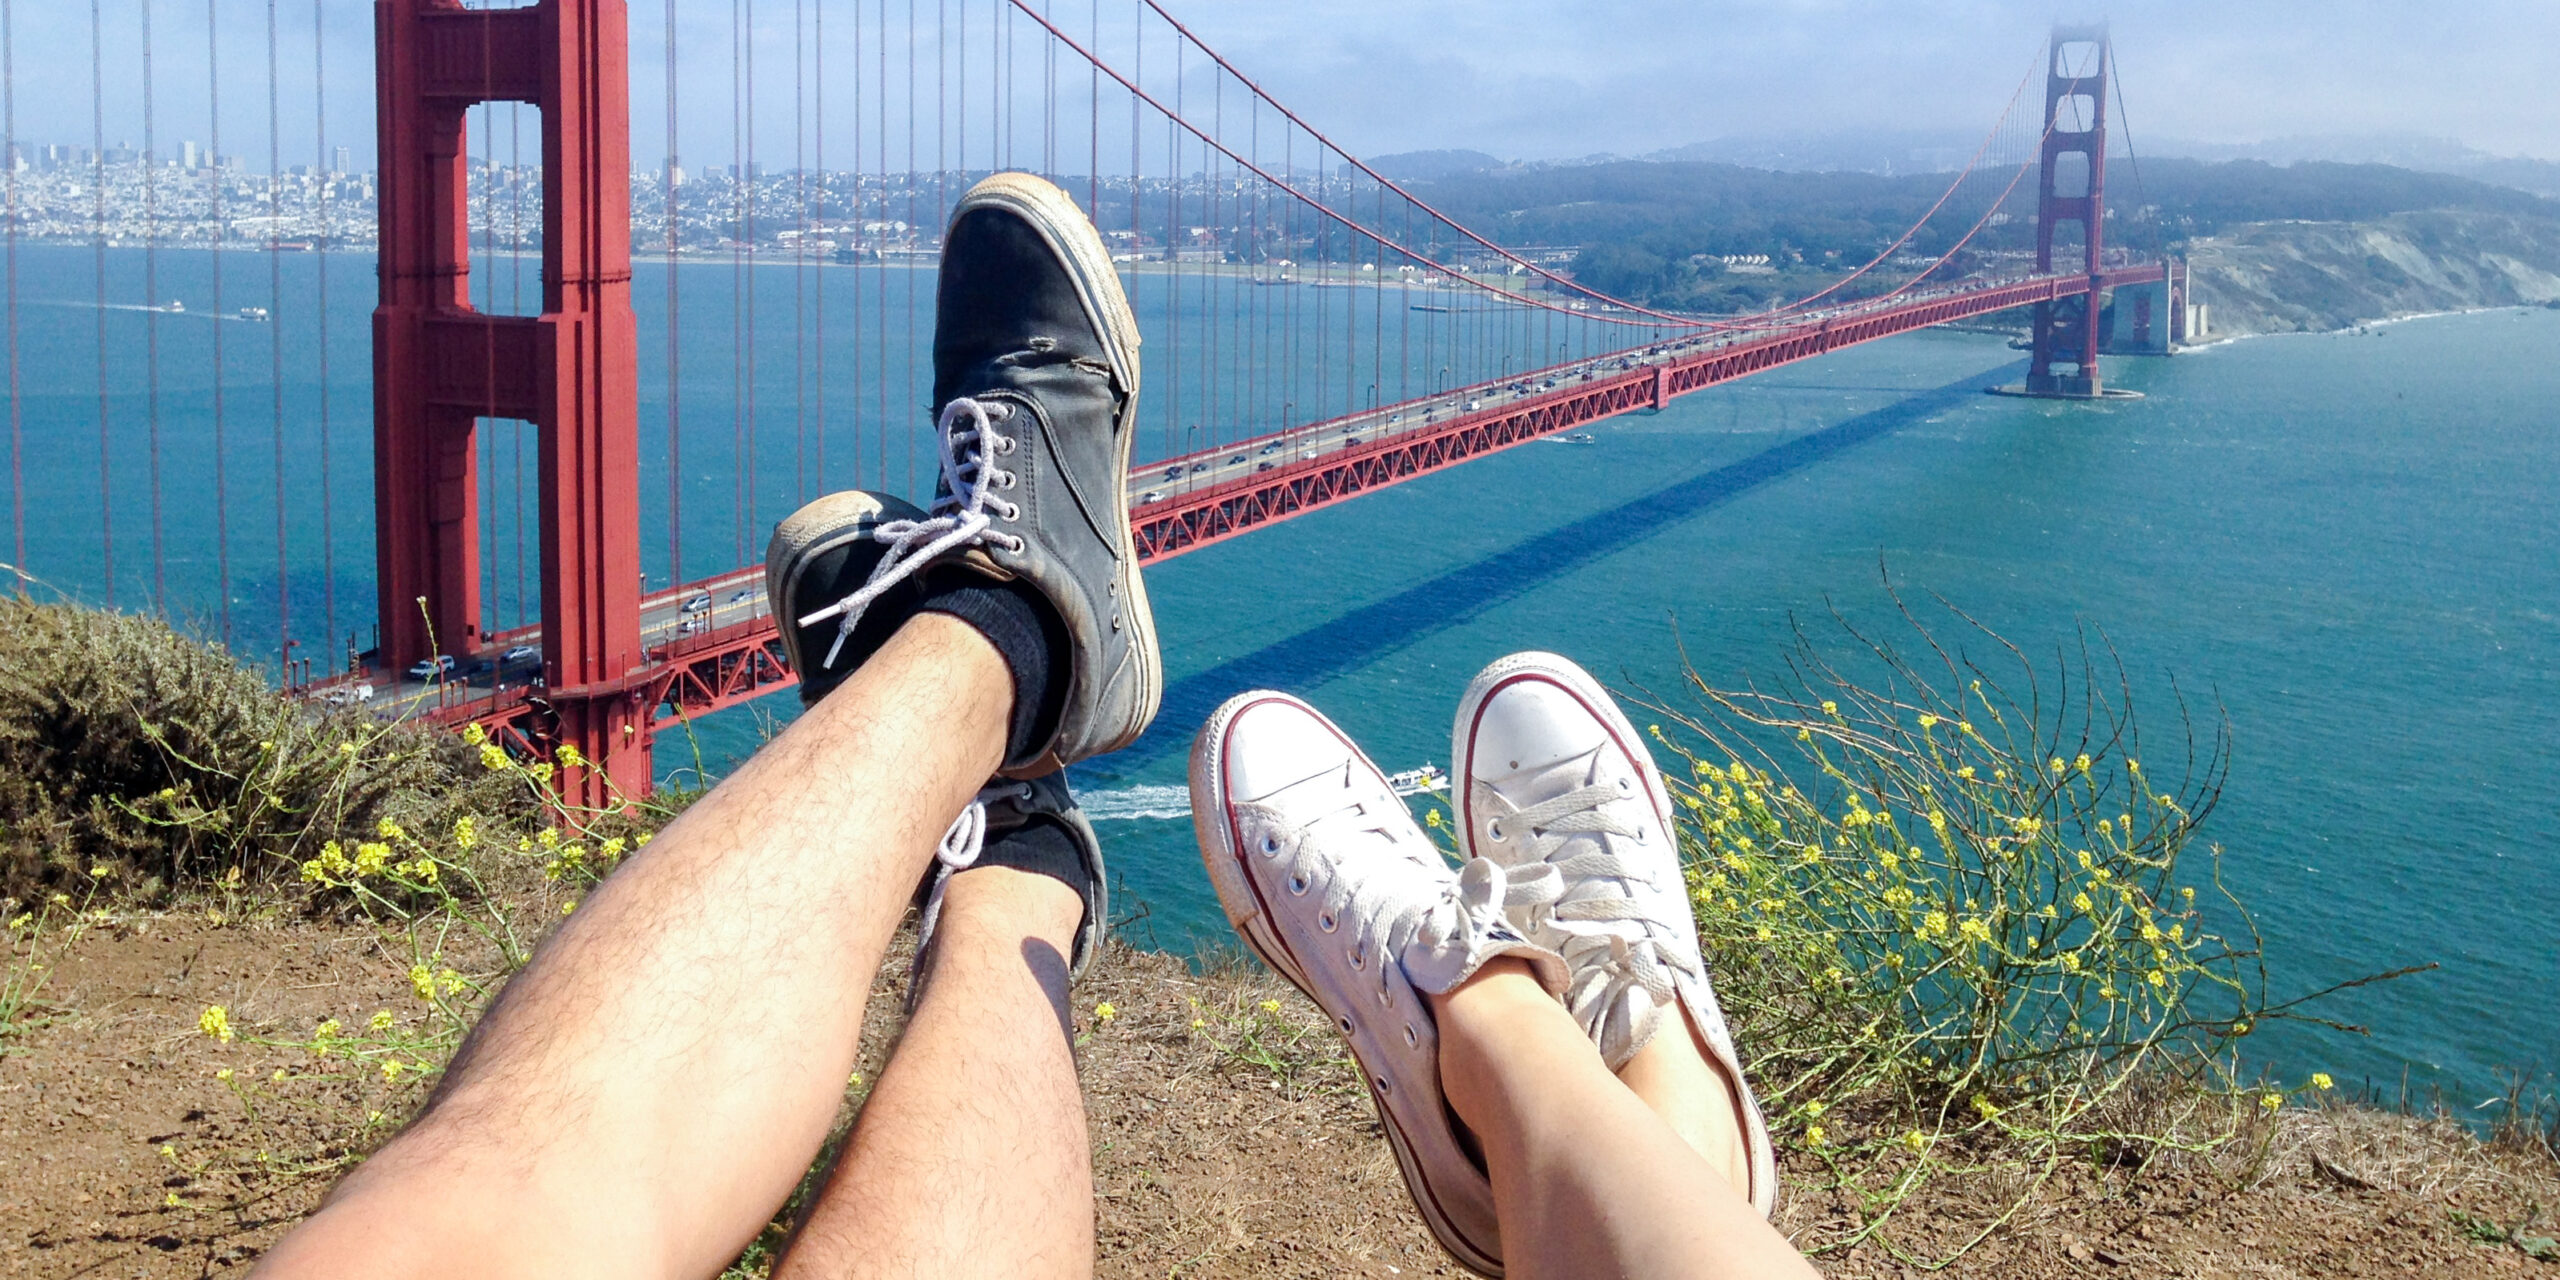 How To Spend A Long Weekend In San Francisco